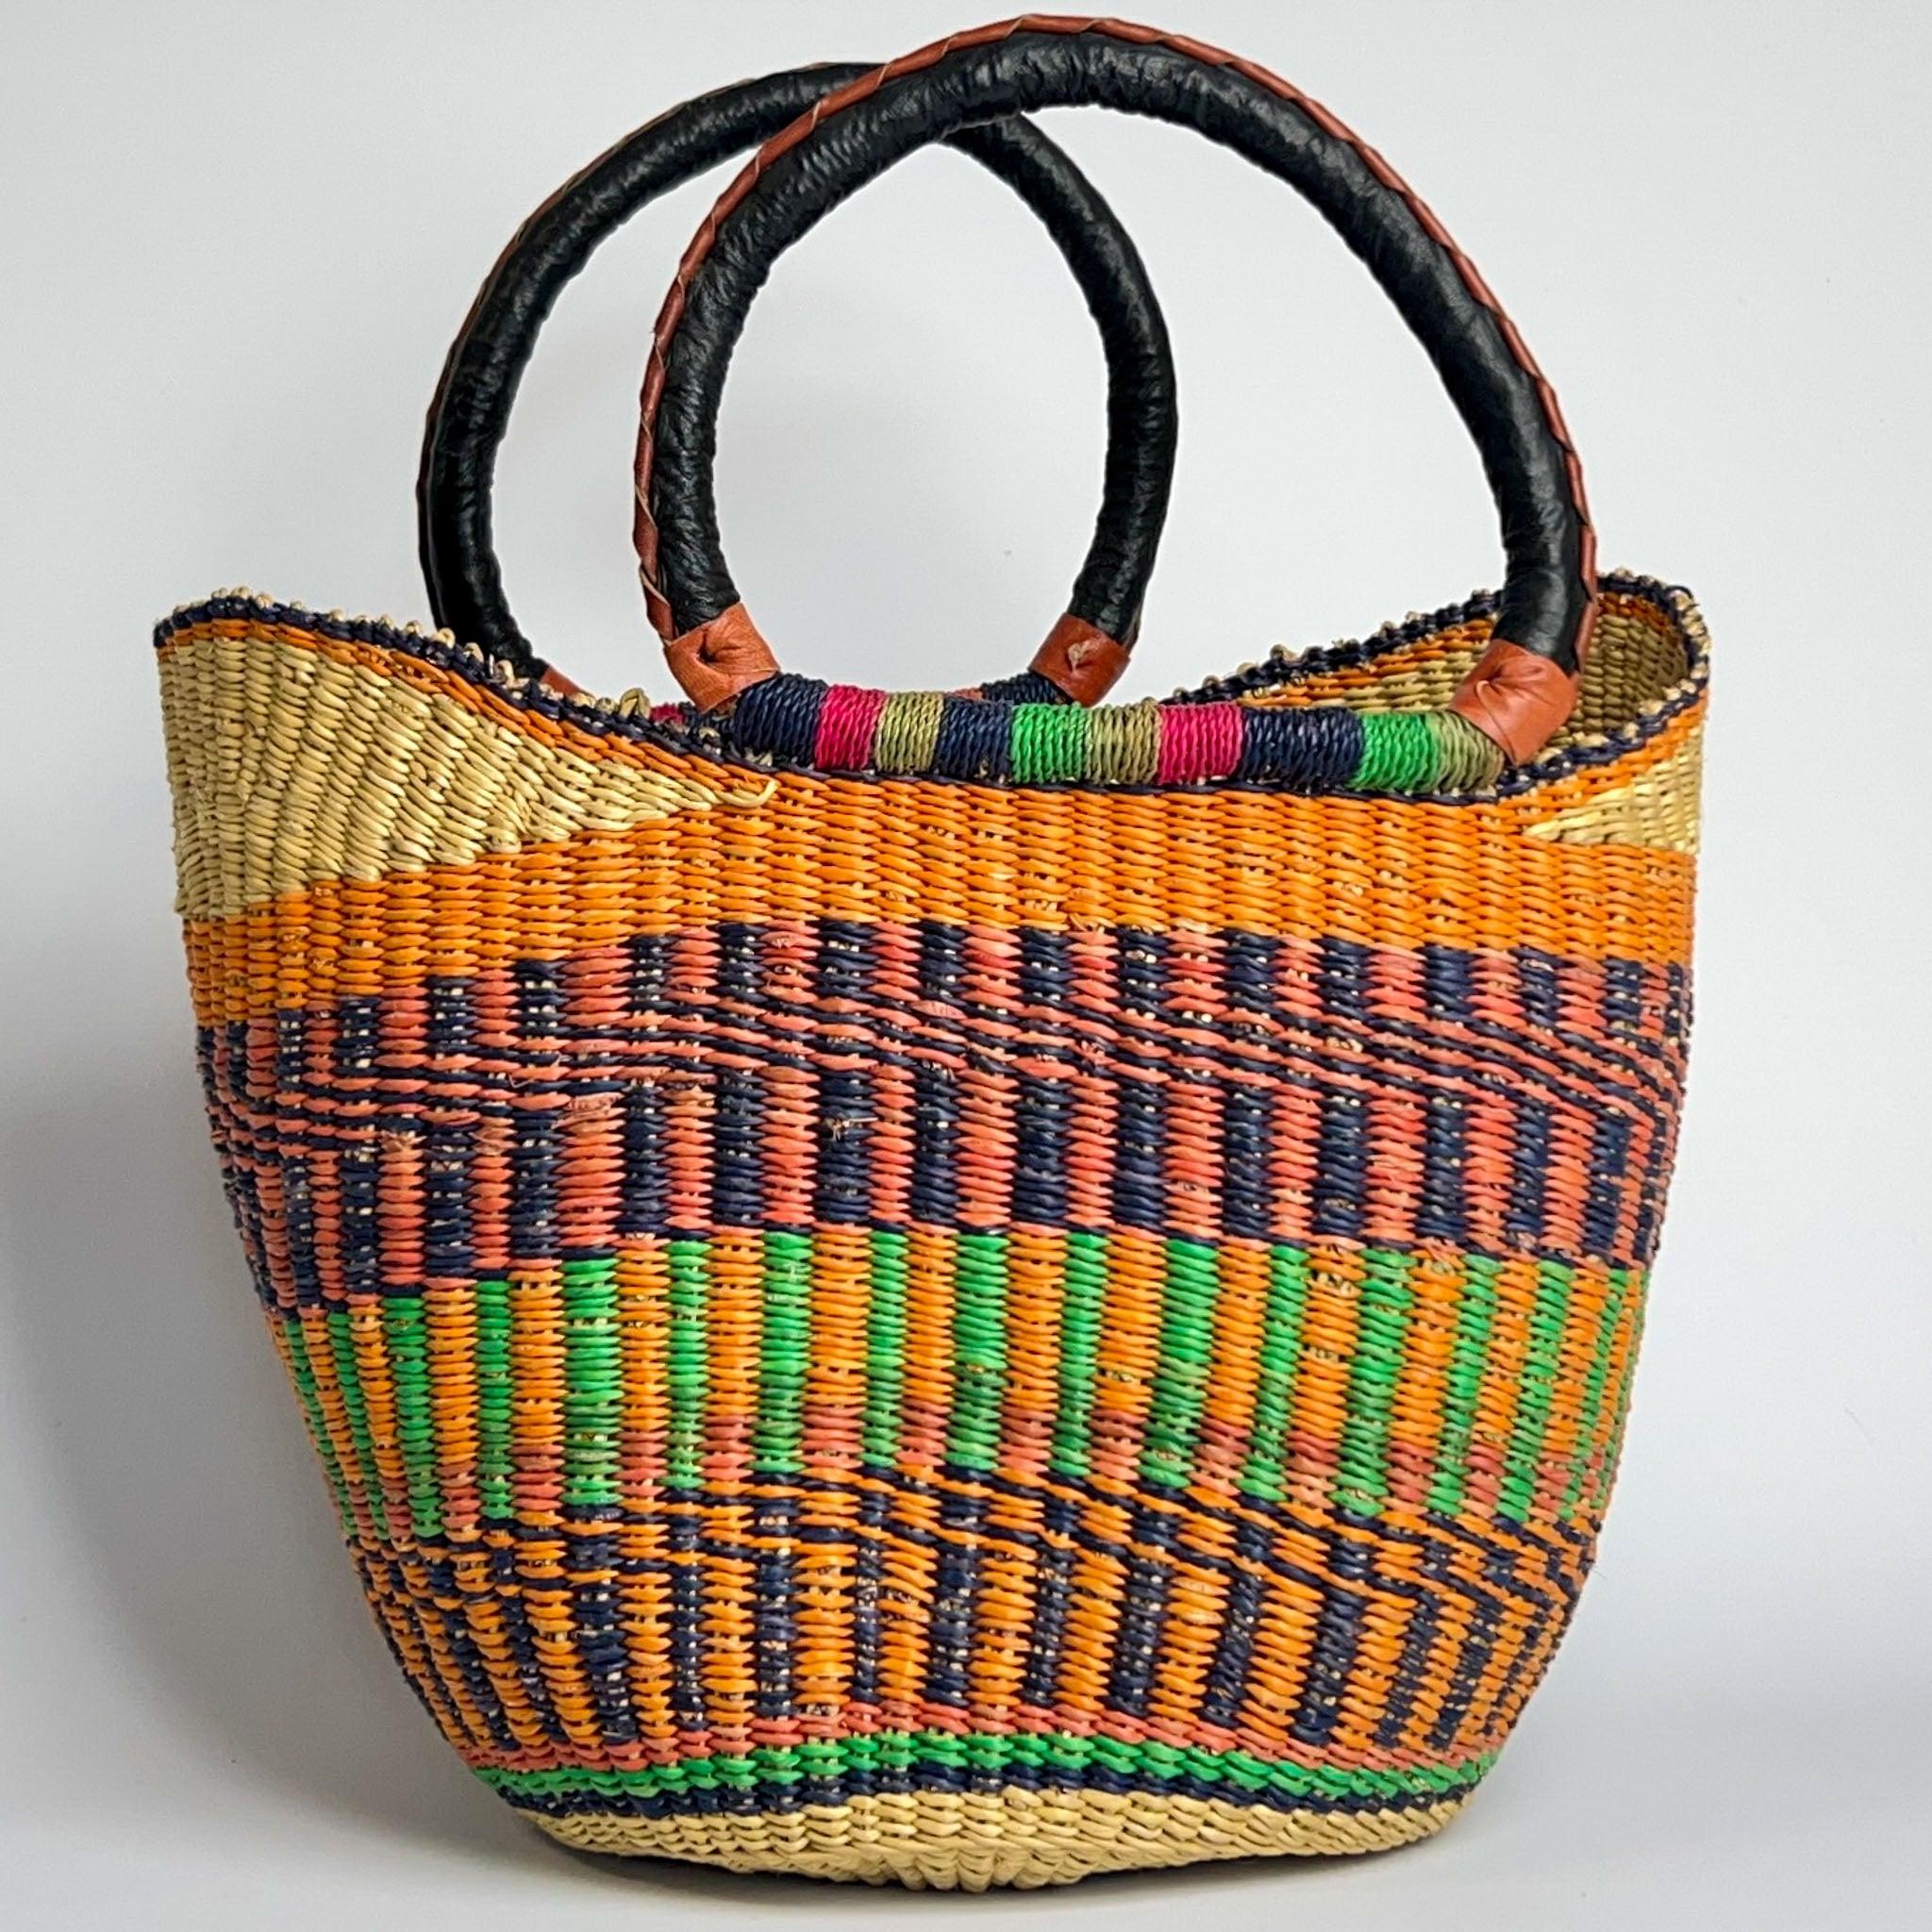 Bright orange, blue and lime shopper basket from Ghana, with black leather handles and a decorative and colourful design.